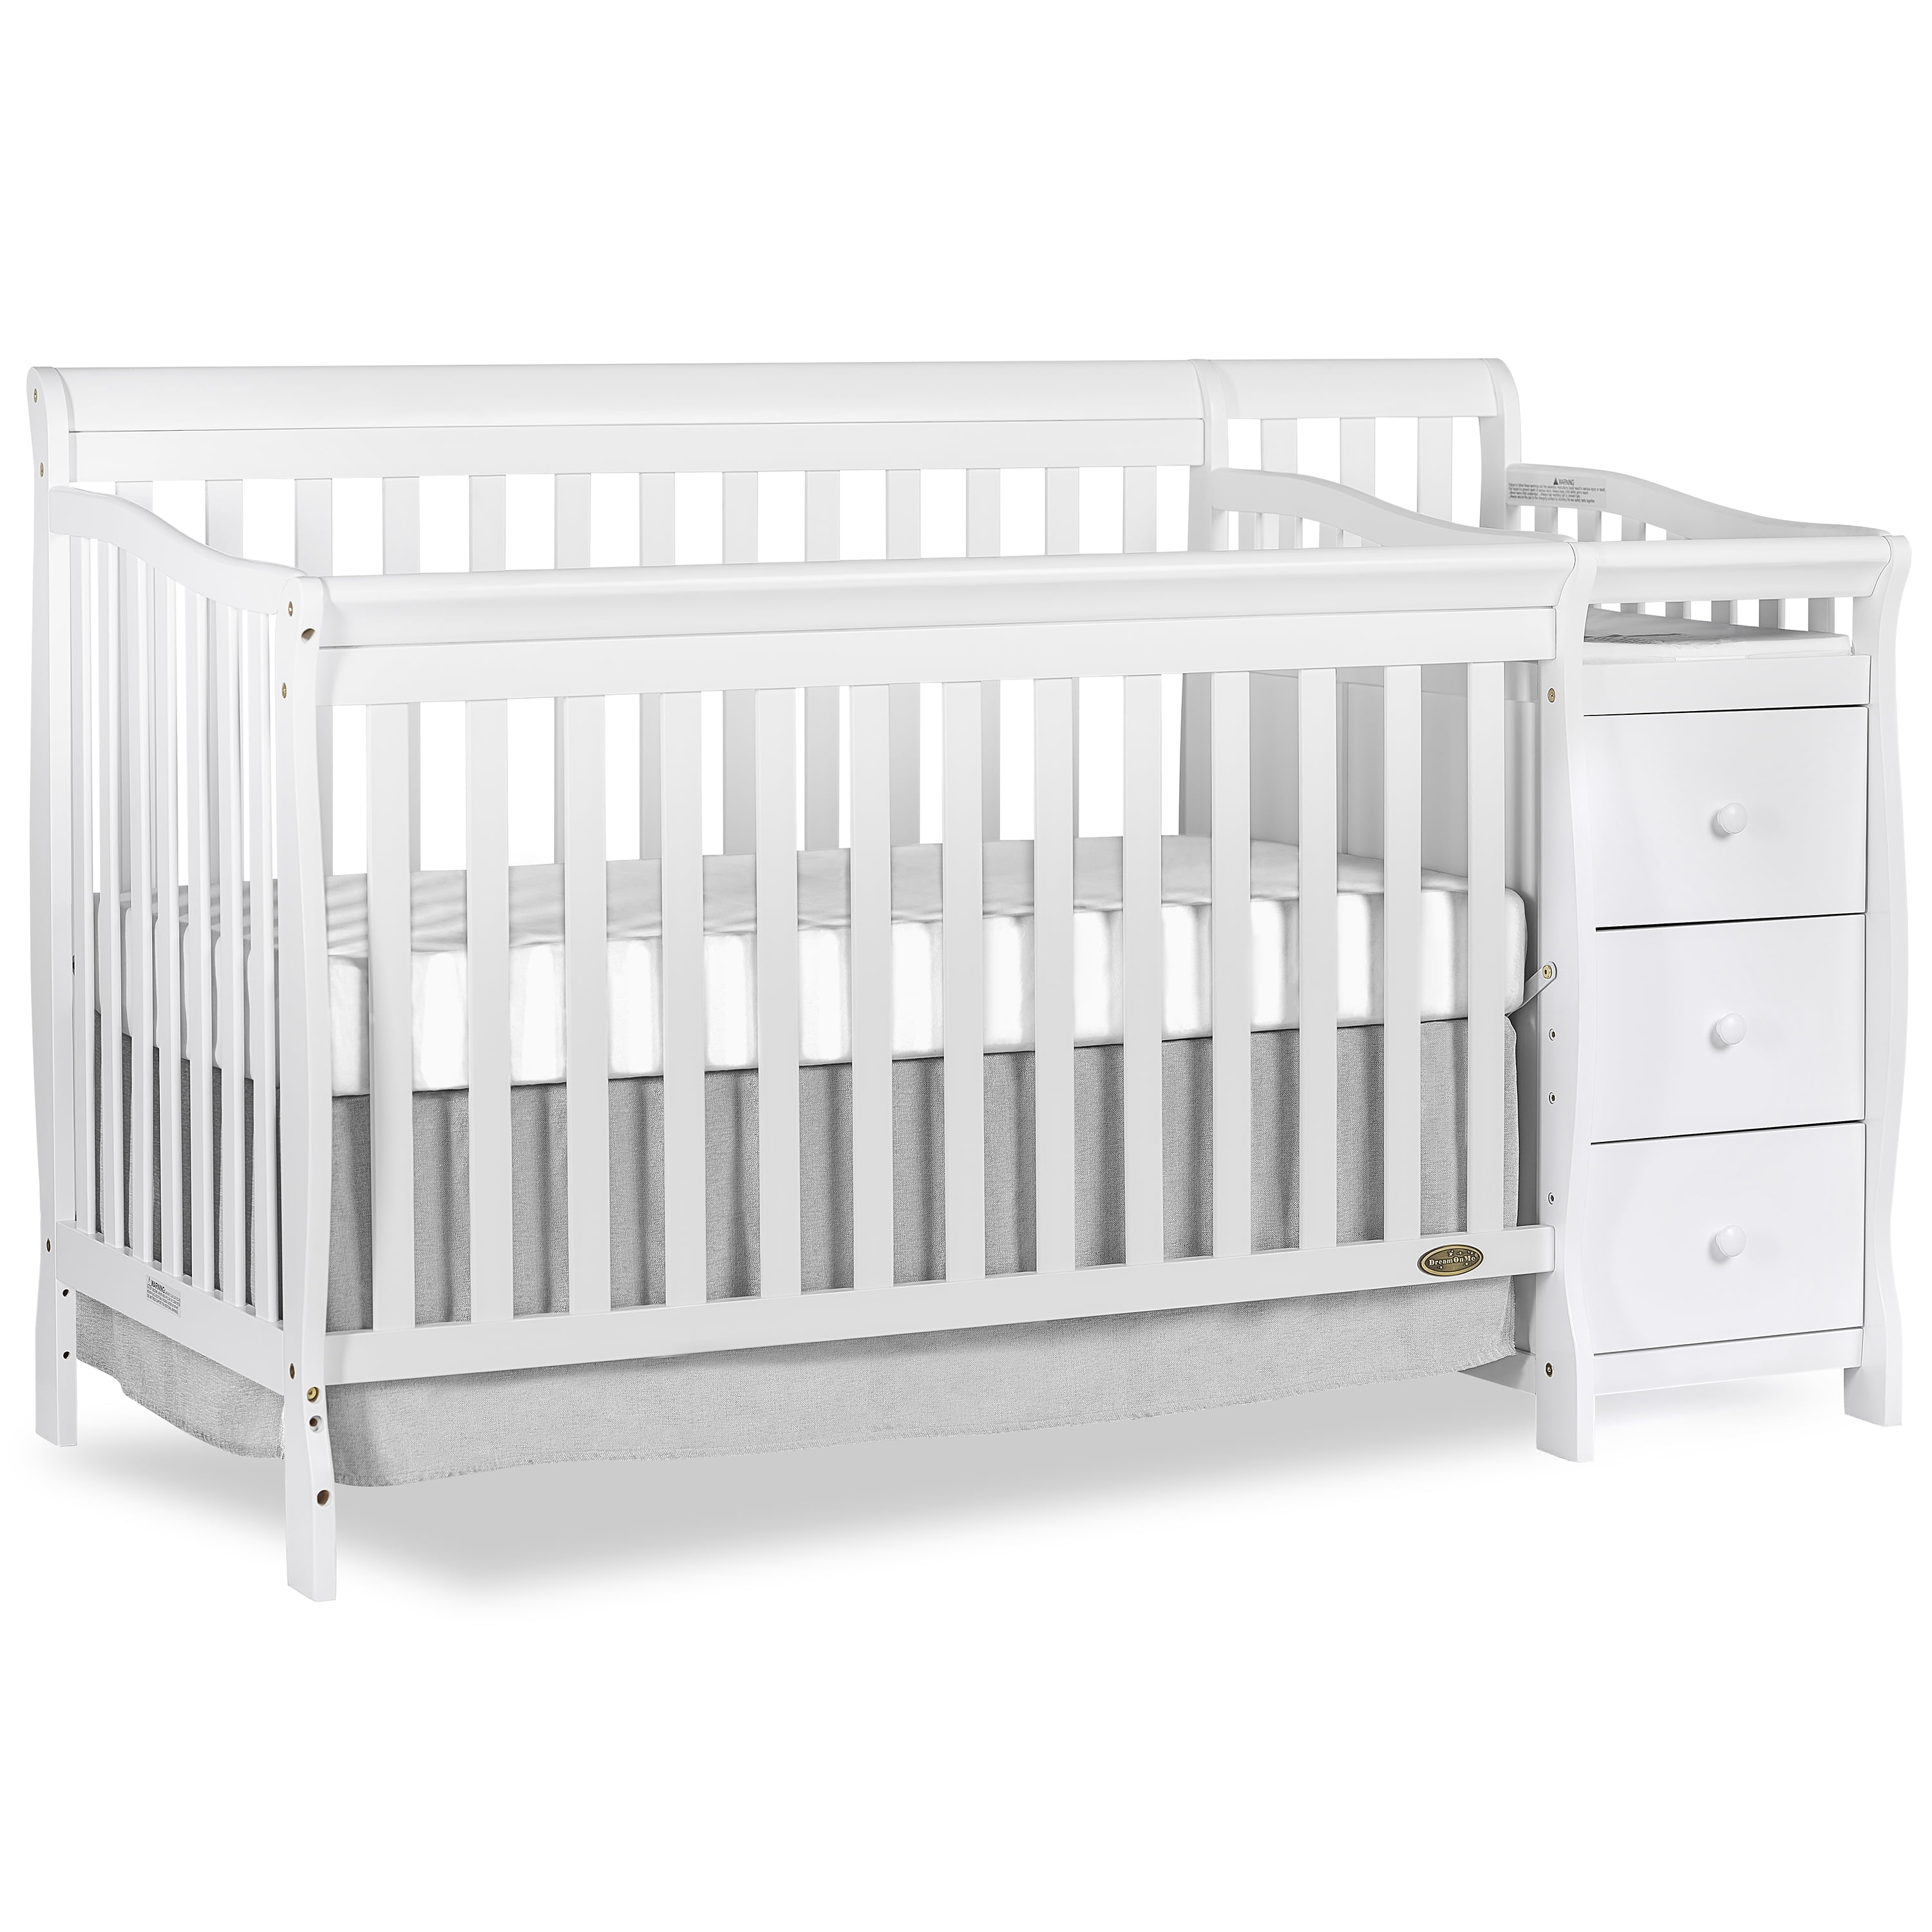 Photo 1 of (BROKEN/CRACKED WOOD) Dream On Me Brody 5-in-1 Convertible Crib White Box